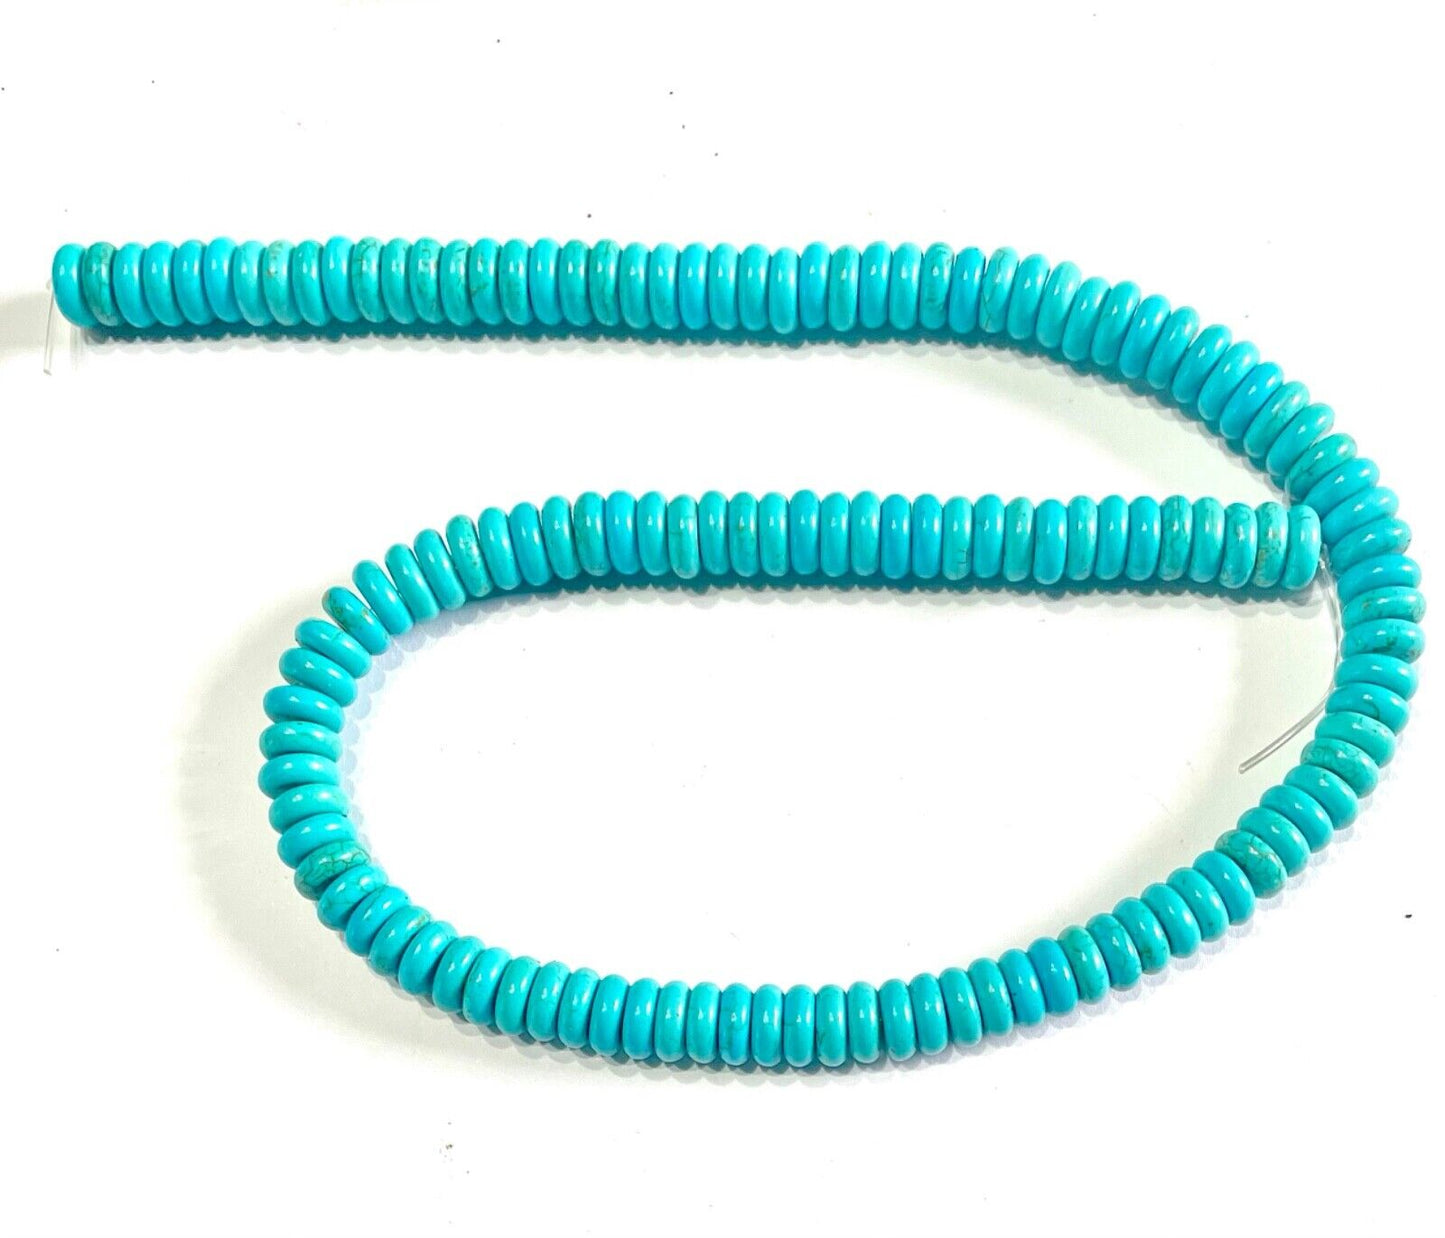 1 strand Rondelle Howlite Turquoise 6mm x 2.5mm Beads (135+ pcs)